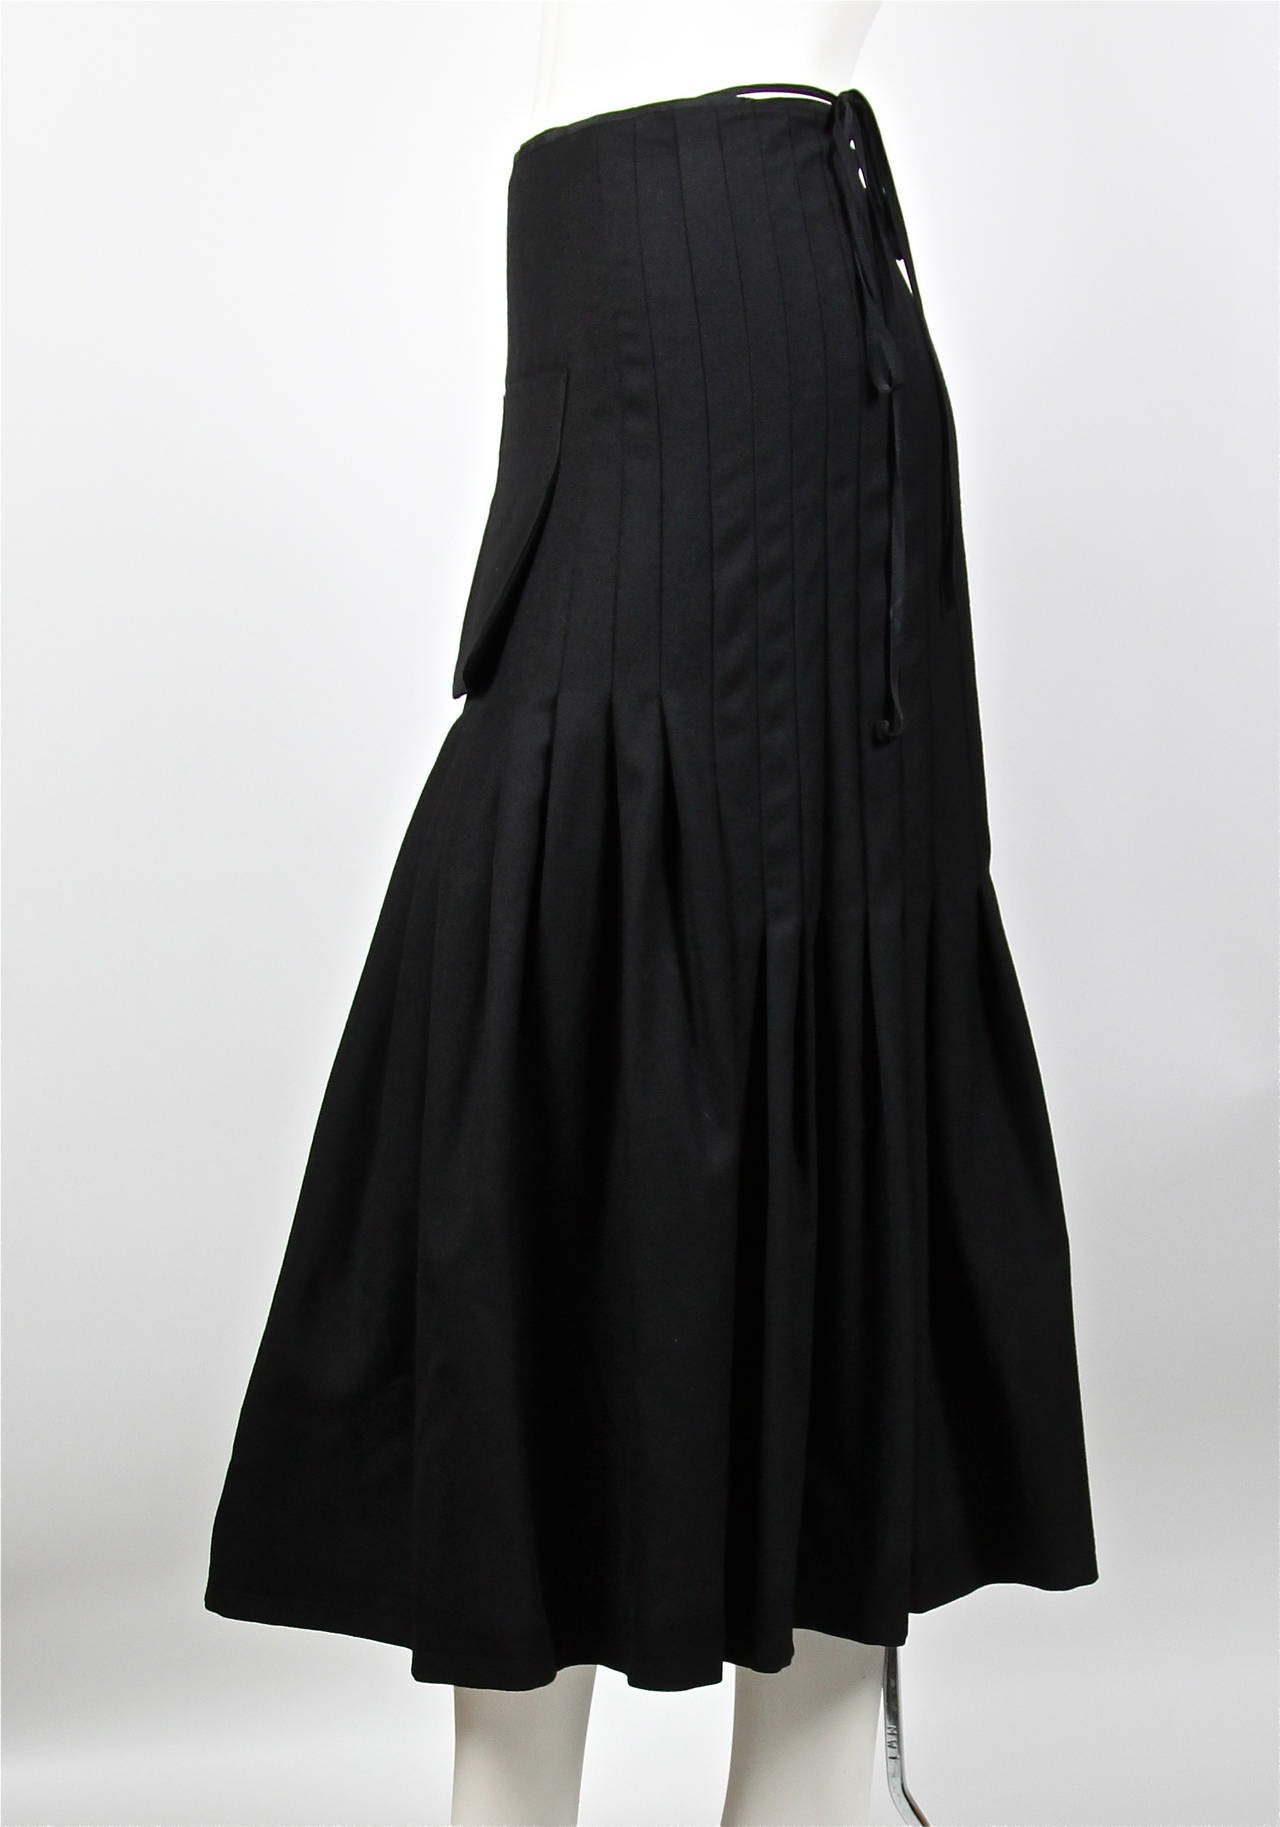 Jet black pleated wool wrap skirt with front pocket from Yohji Yamamoto. Size 1. Approximate measurements: waist 30